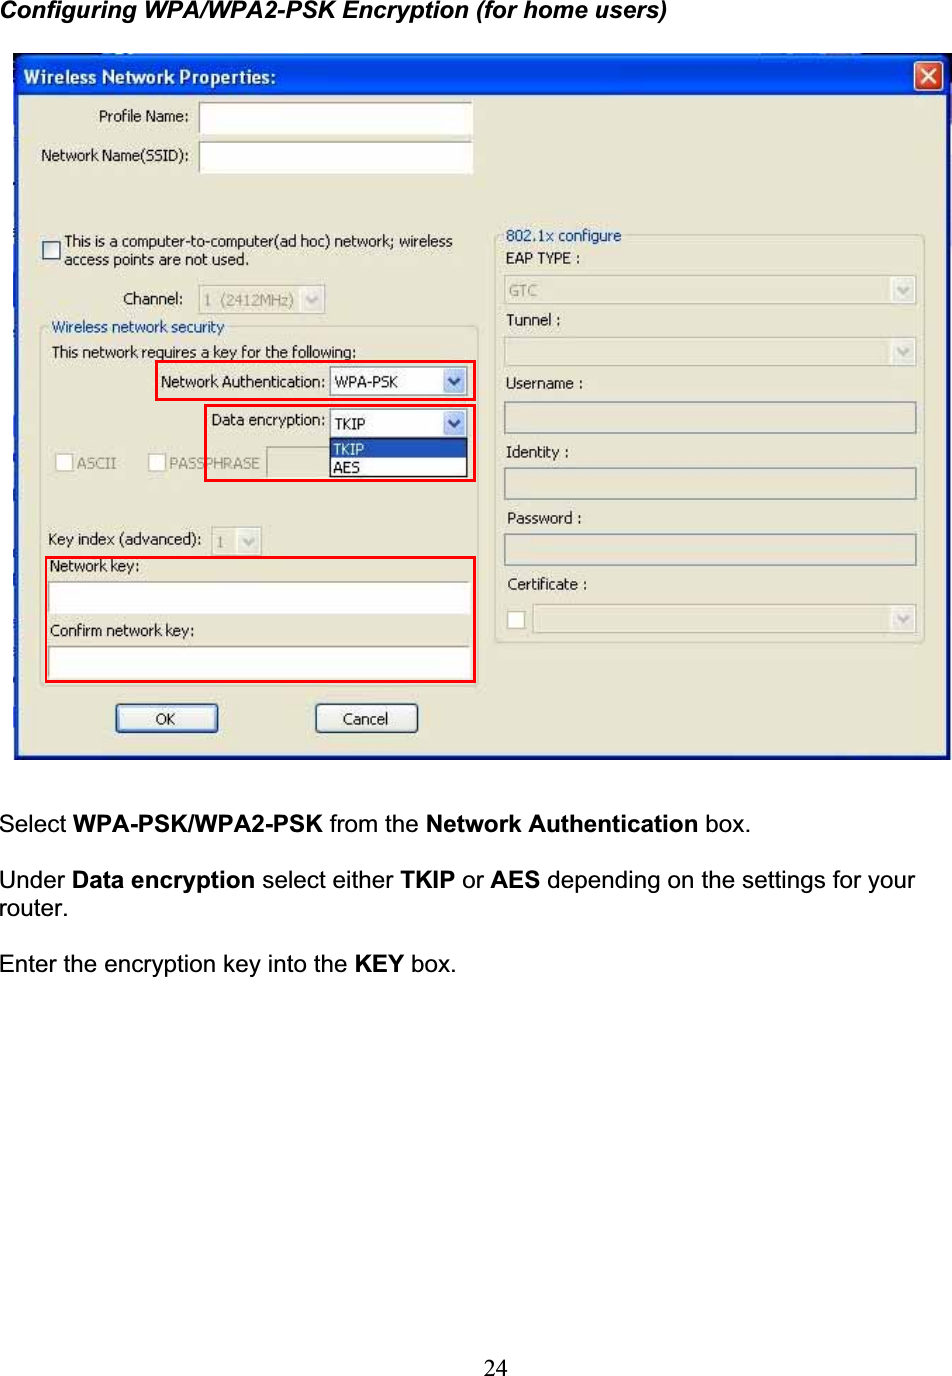 24Configuring WPA/WPA2-PSK Encryption (for home users)Select WPA-PSK/WPA2-PSK from the Network Authentication box.Under Data encryption select either TKIP or AES depending on the settings for yourrouter.Enter the encryption key into the KEY box.